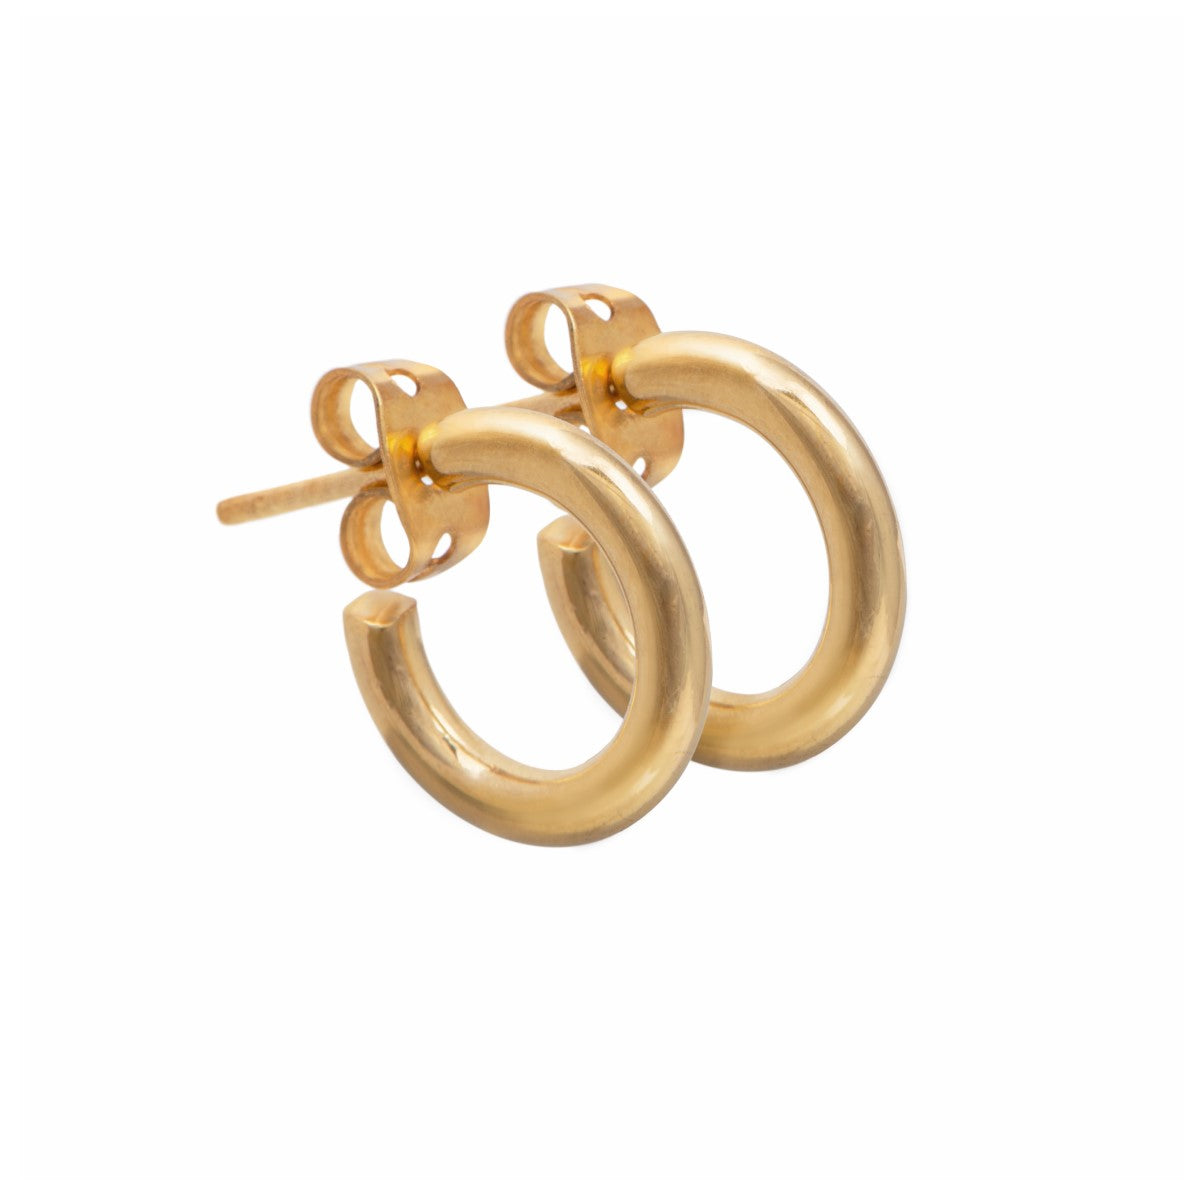 Gold Plated Sterling Silver Small Hoop Earrings with a Rounded Edge